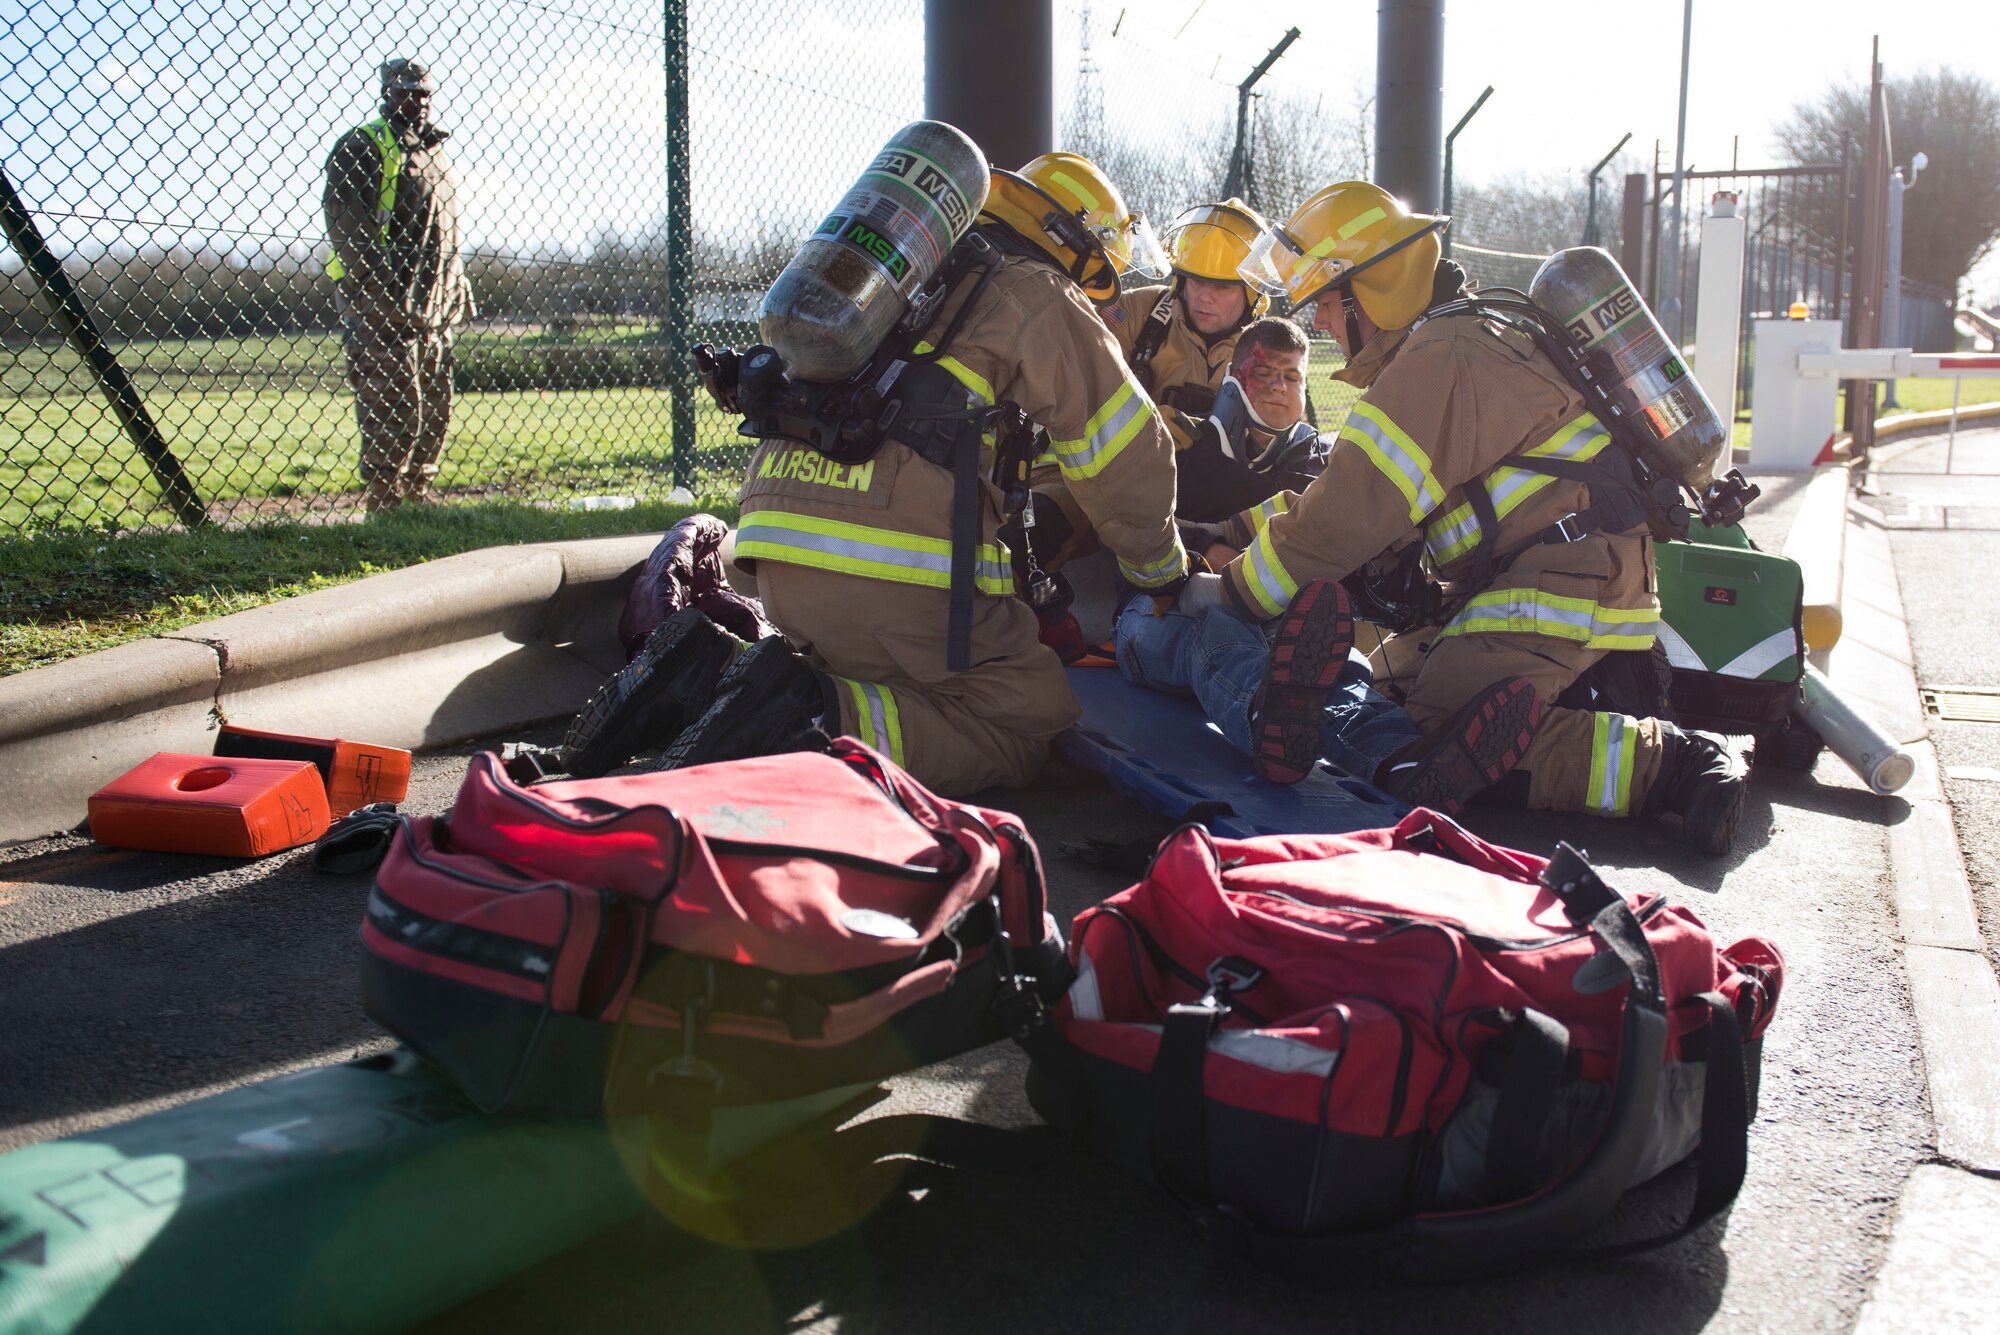 422nd Civil Engineer Squadron firefighters assist a simulated casualty during the 501st Combat Support Wing Readiness Exercise 20-01 at RAF Croughton, England, Feb. 12, 2020. The exercise tested the wing’s preparedness and response capabilities to an emergency situation. (U.S. Air Force photo by Airman 1st Class Jennifer Zima)